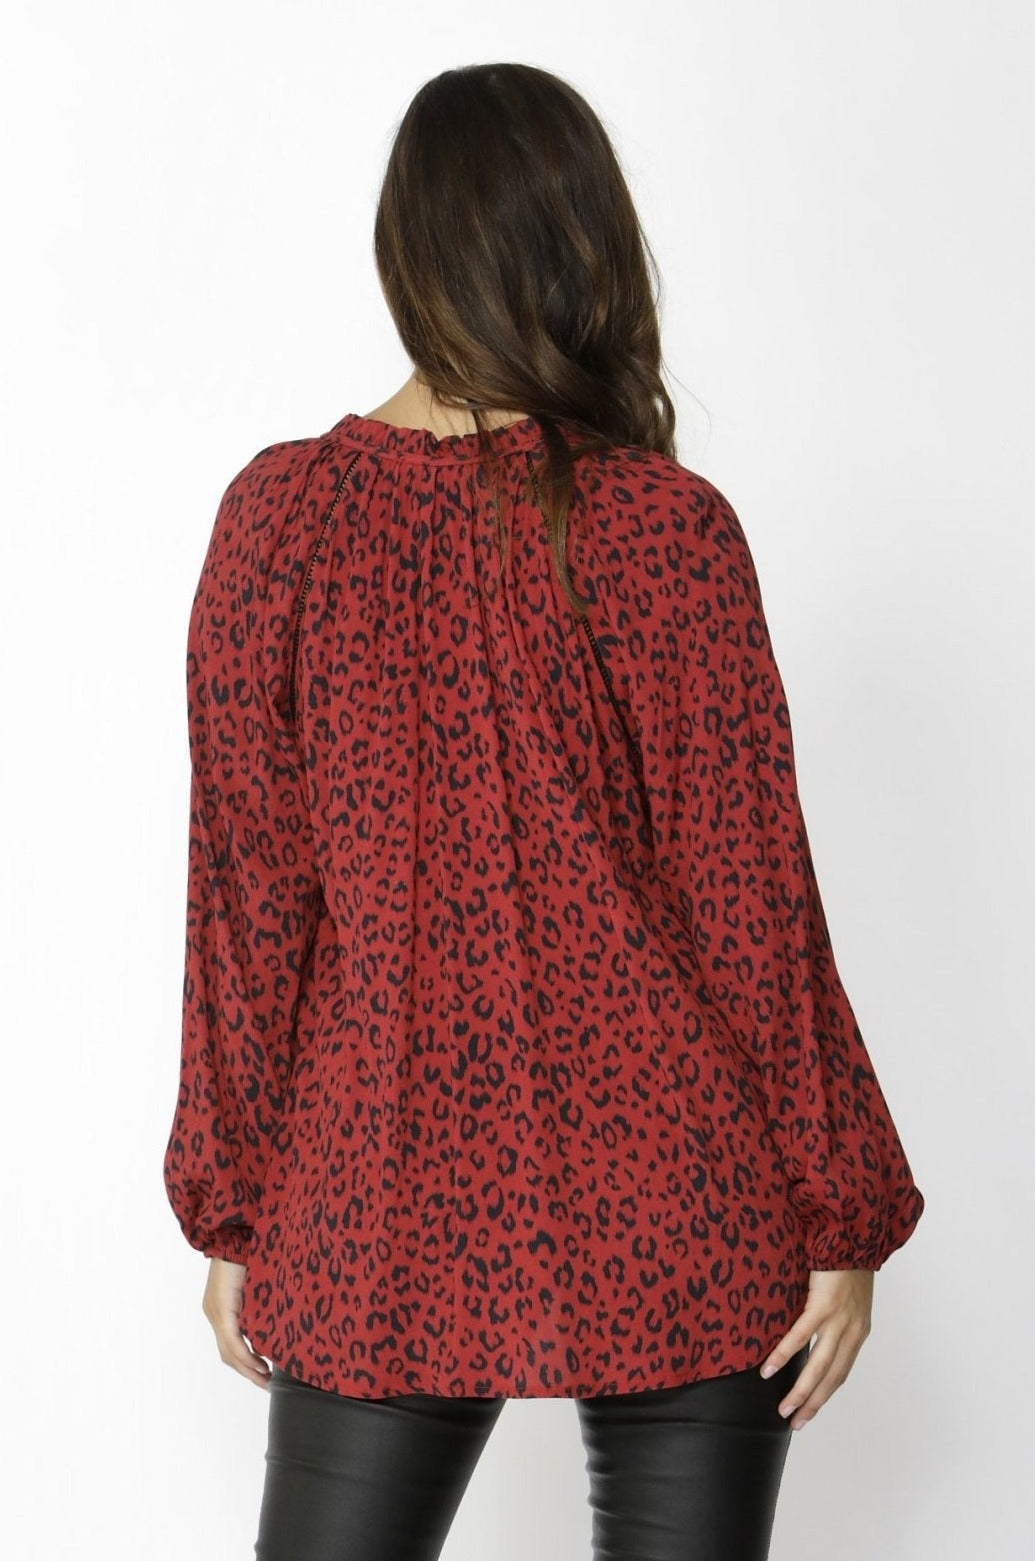 Fate + Becker Strong Enough Shirt in Red Leopard Print - Hey Sara